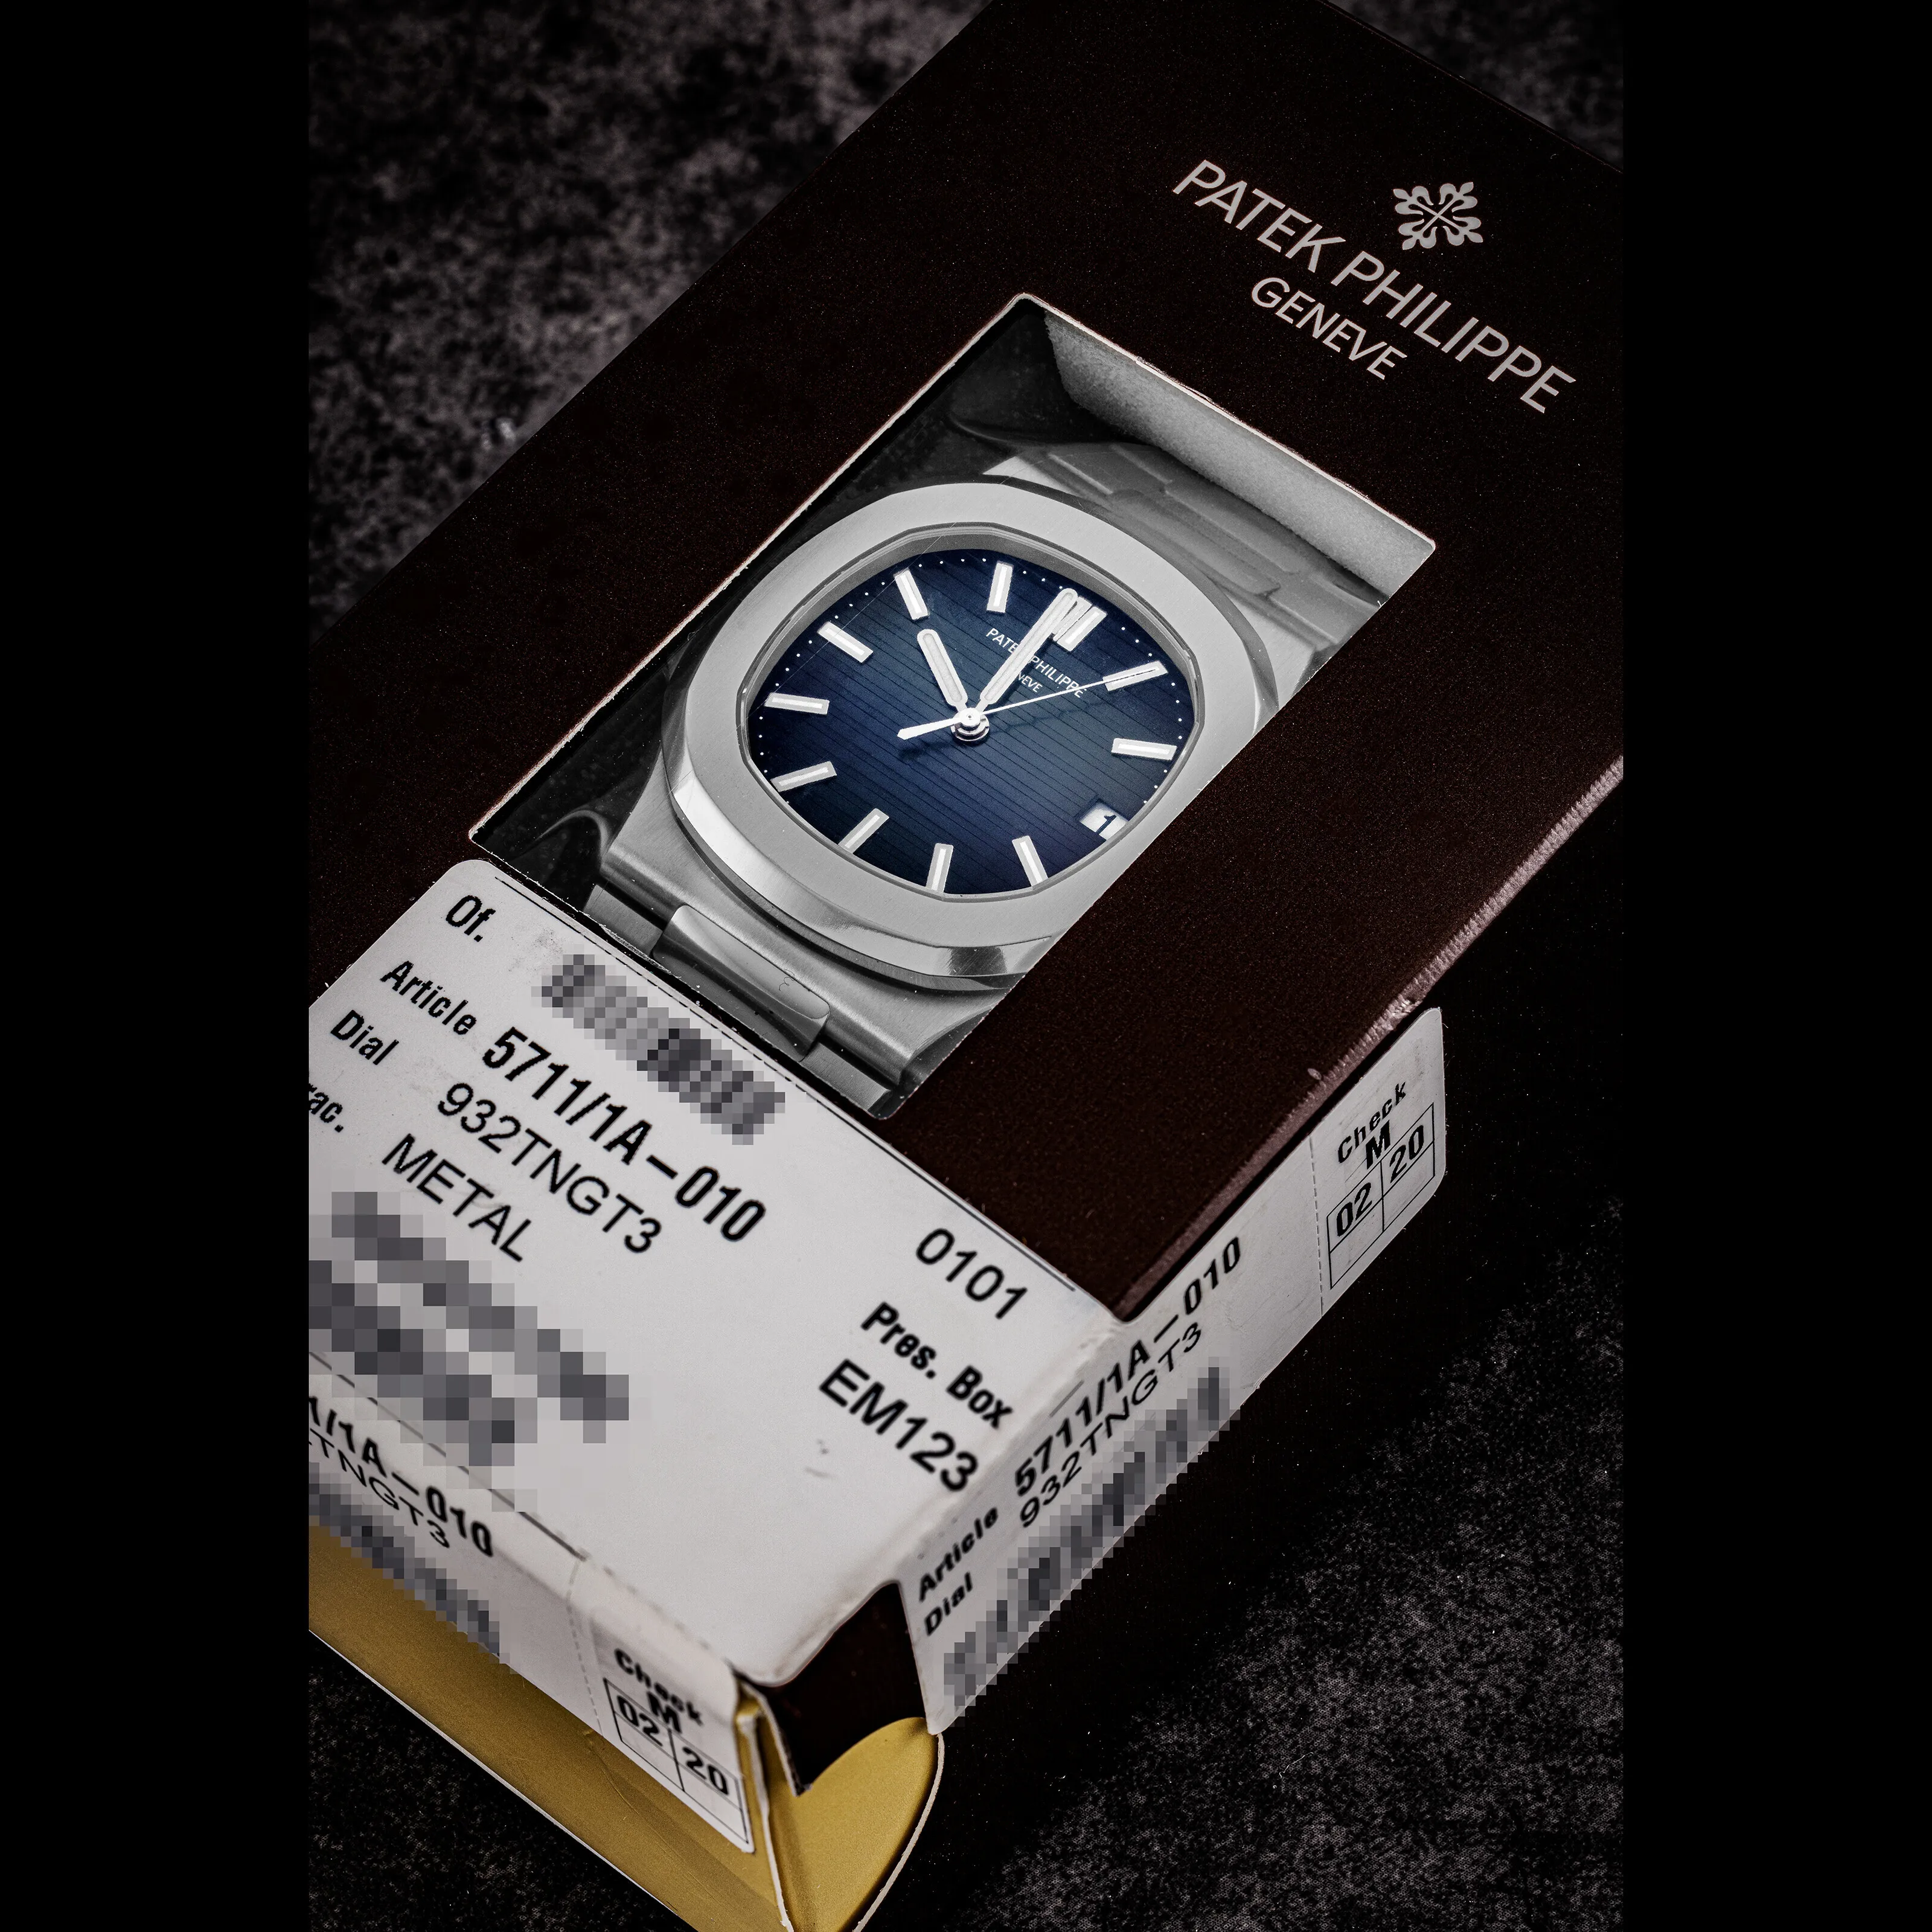 Patek Philippe Nautilus 5711/1A-010 40mm Stainless steel Gray